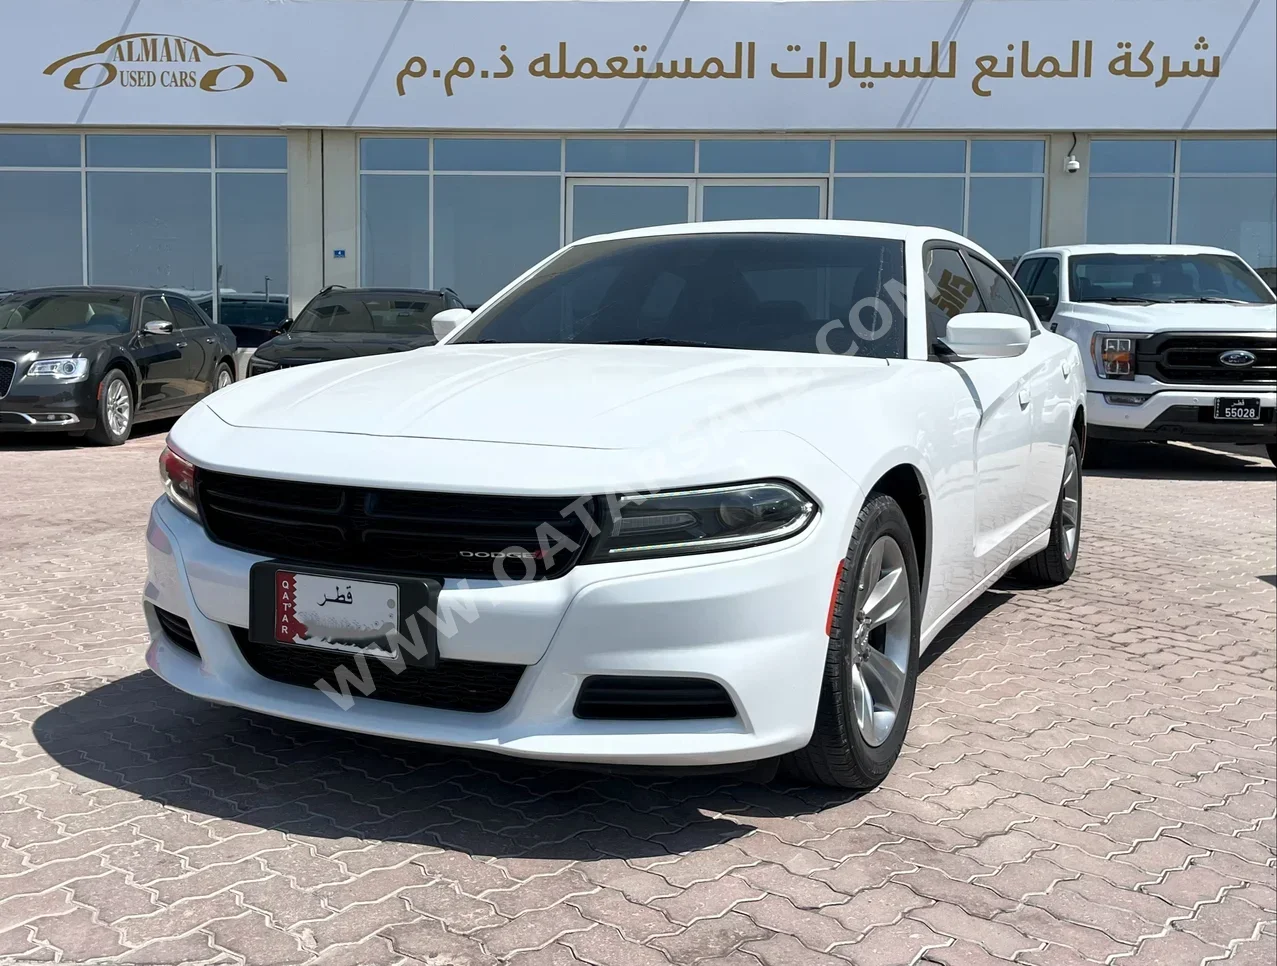 Dodge  Charger  SXT  2020  Automatic  28,000 Km  6 Cylinder  Front Wheel Drive (FWD)  Sedan  White